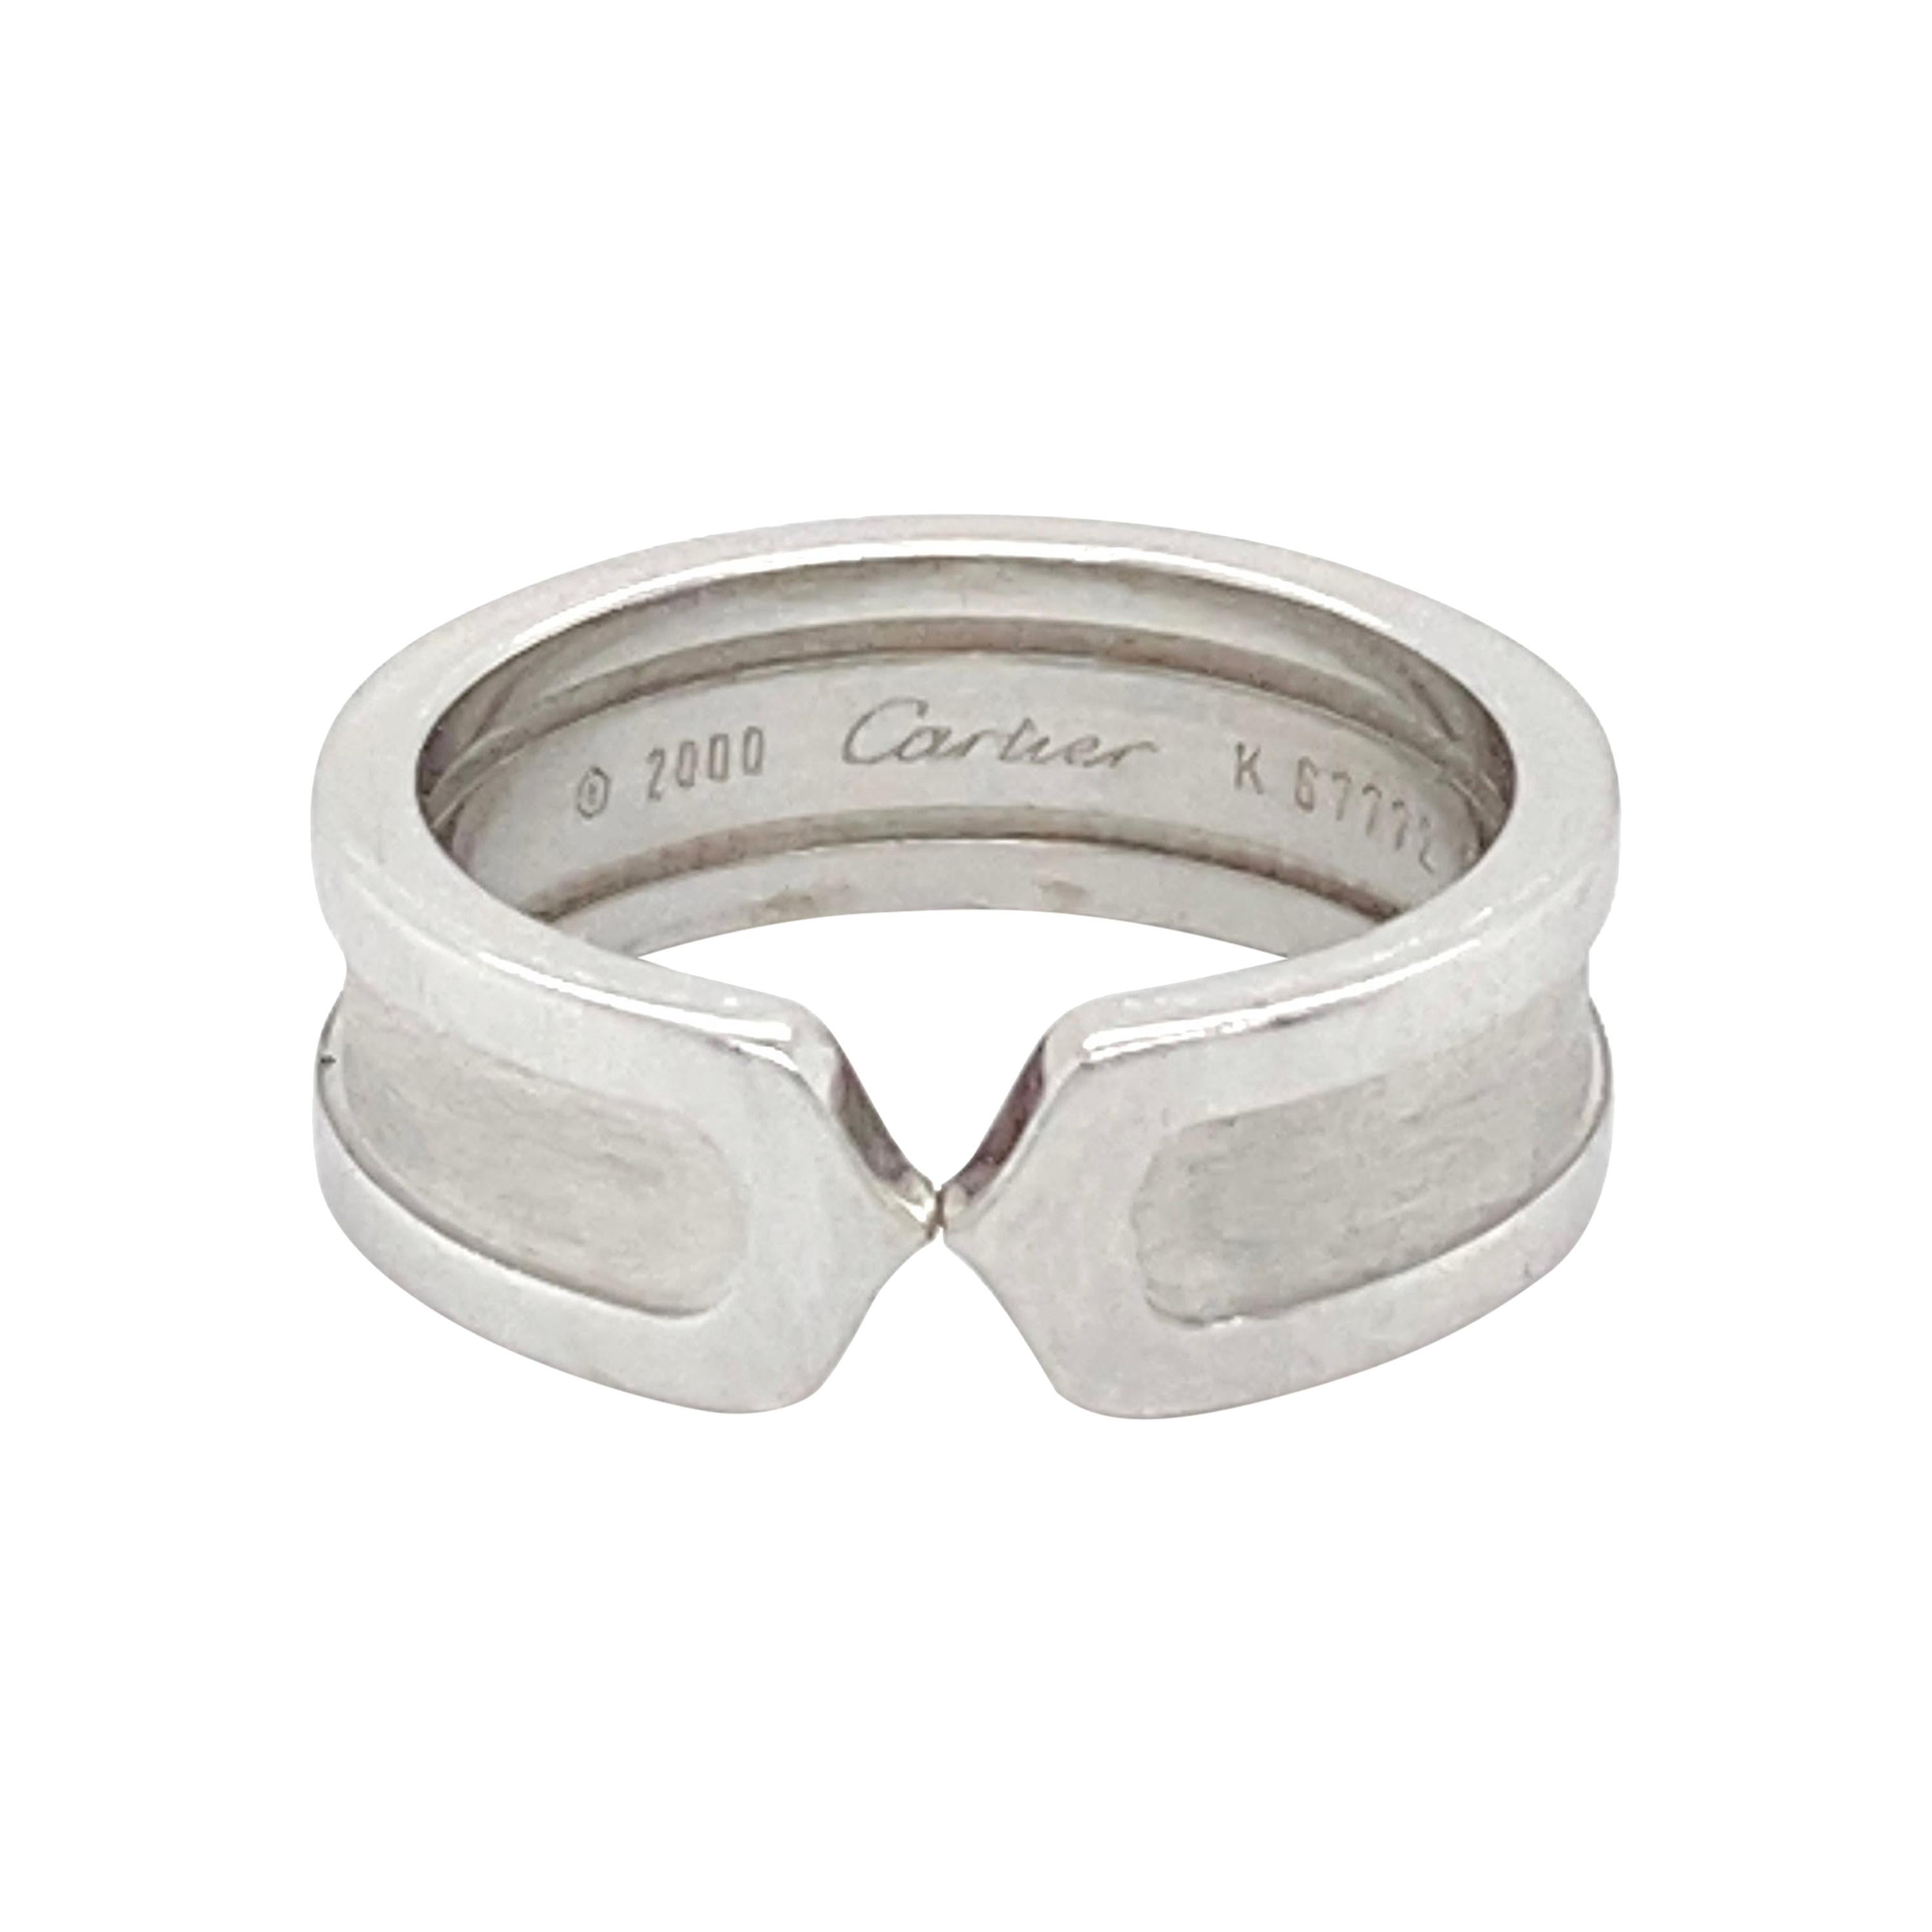 cartier ring 2000